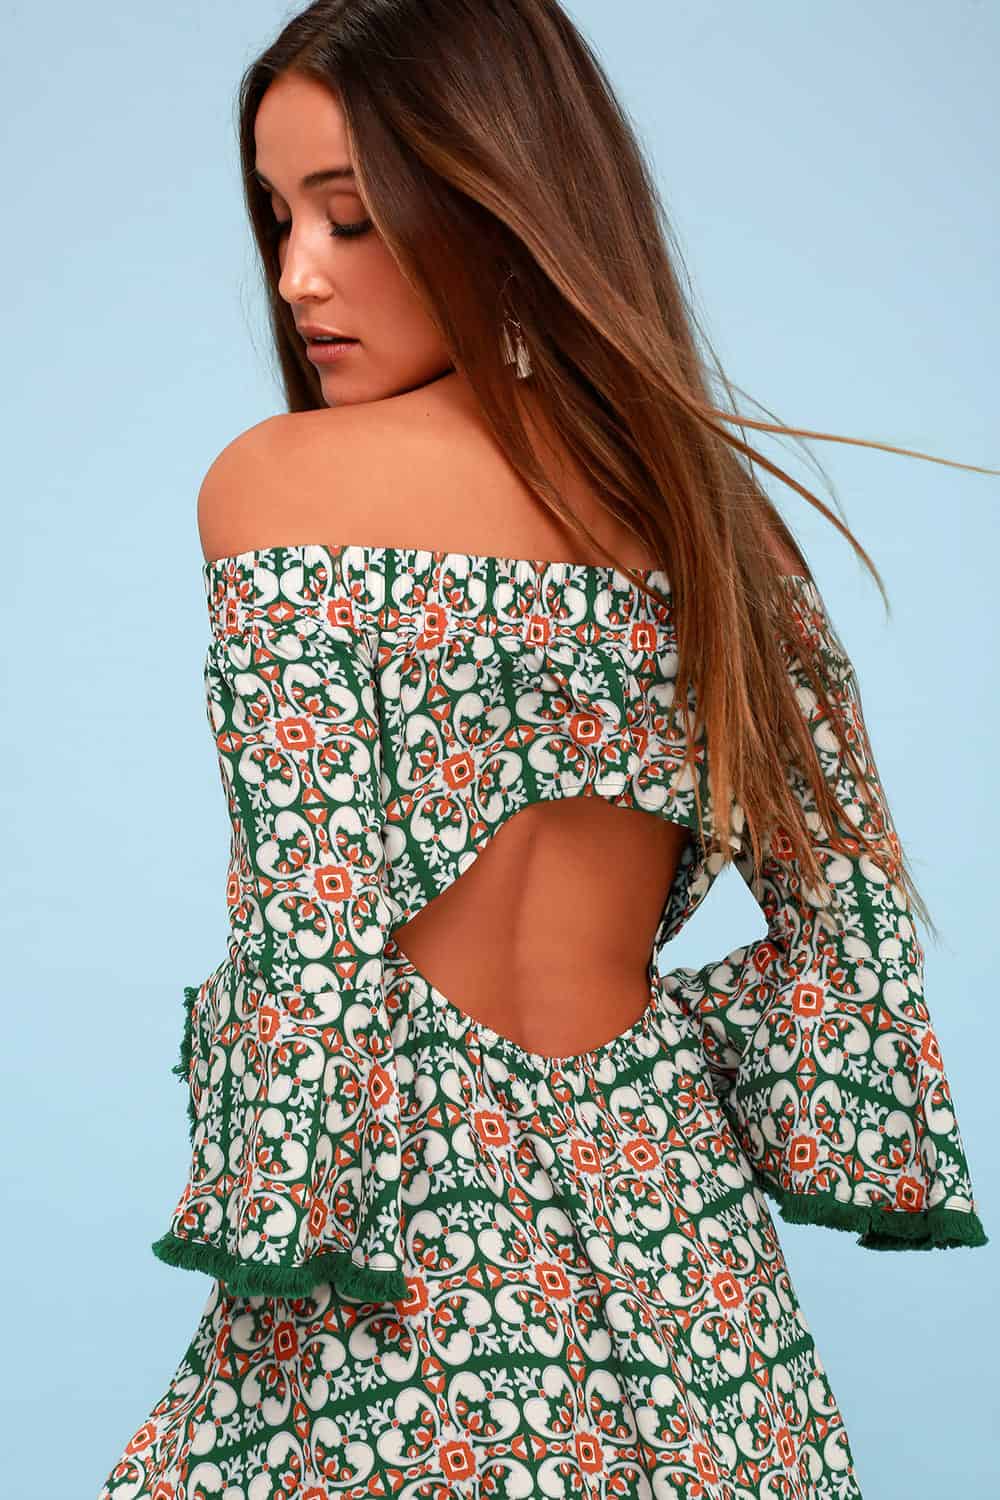 Amalfi Coast Outfits Positano Italy Dresses Green Pattern Off The Shoulder Open Back Floral Print Dress